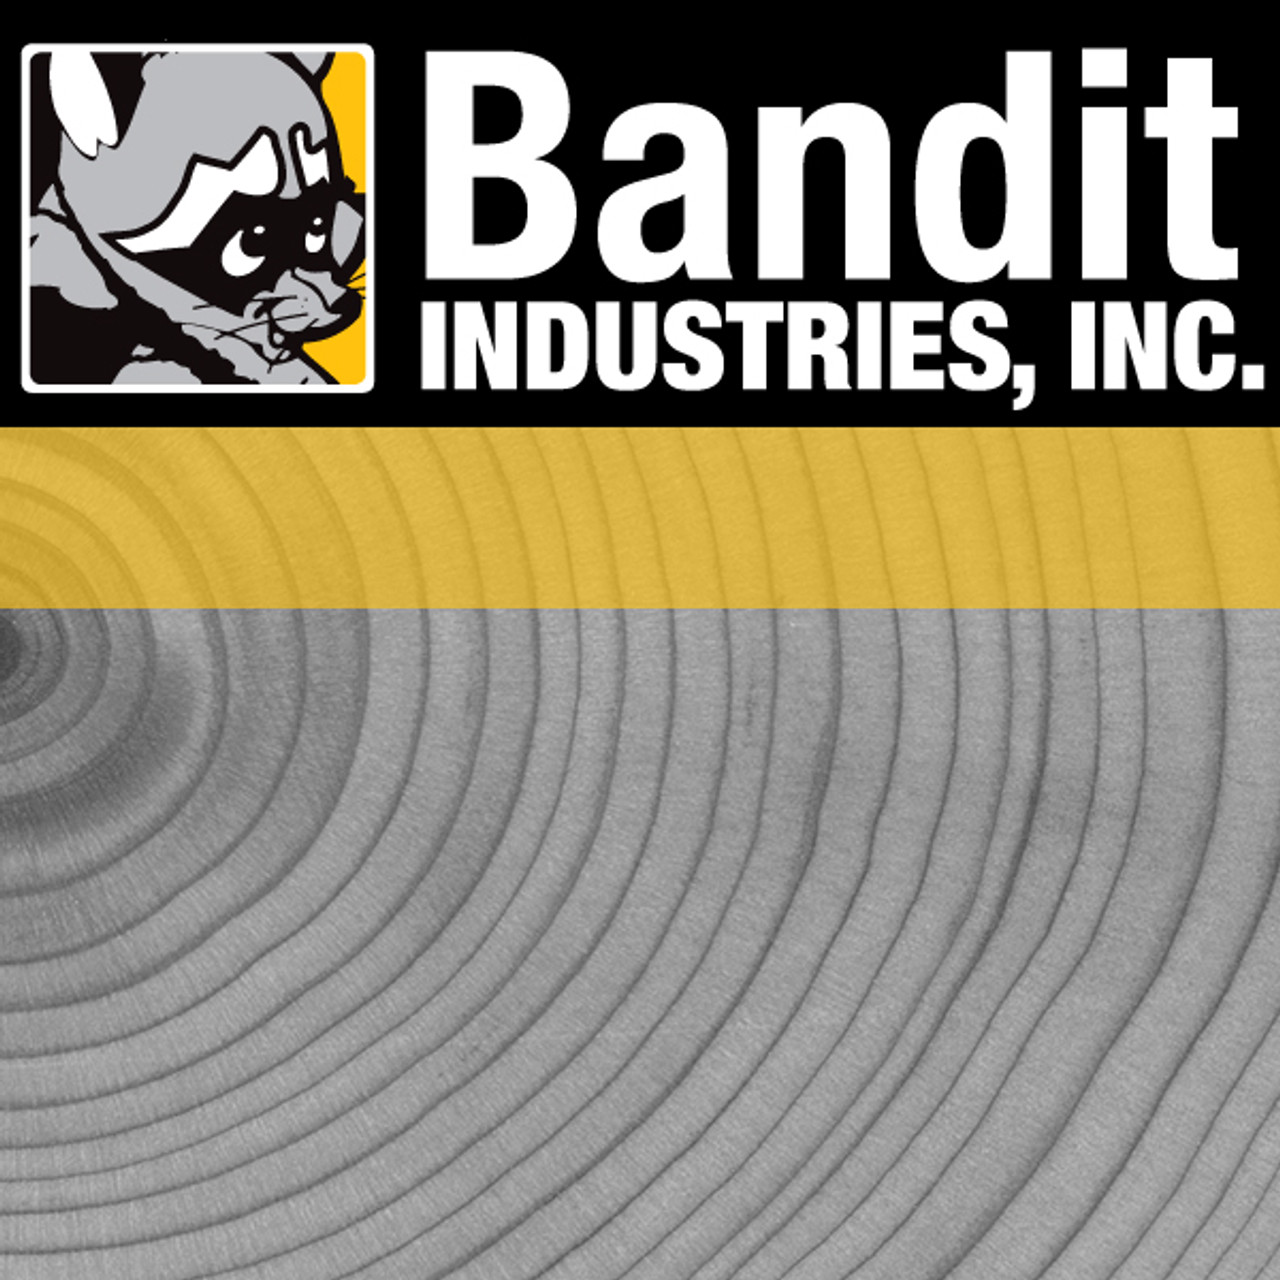 900-9900-61: BANDIT BLOWER HOSE FOR 1290/1690 DRUM 20"" LONG W/CLAMPS 6"" ID